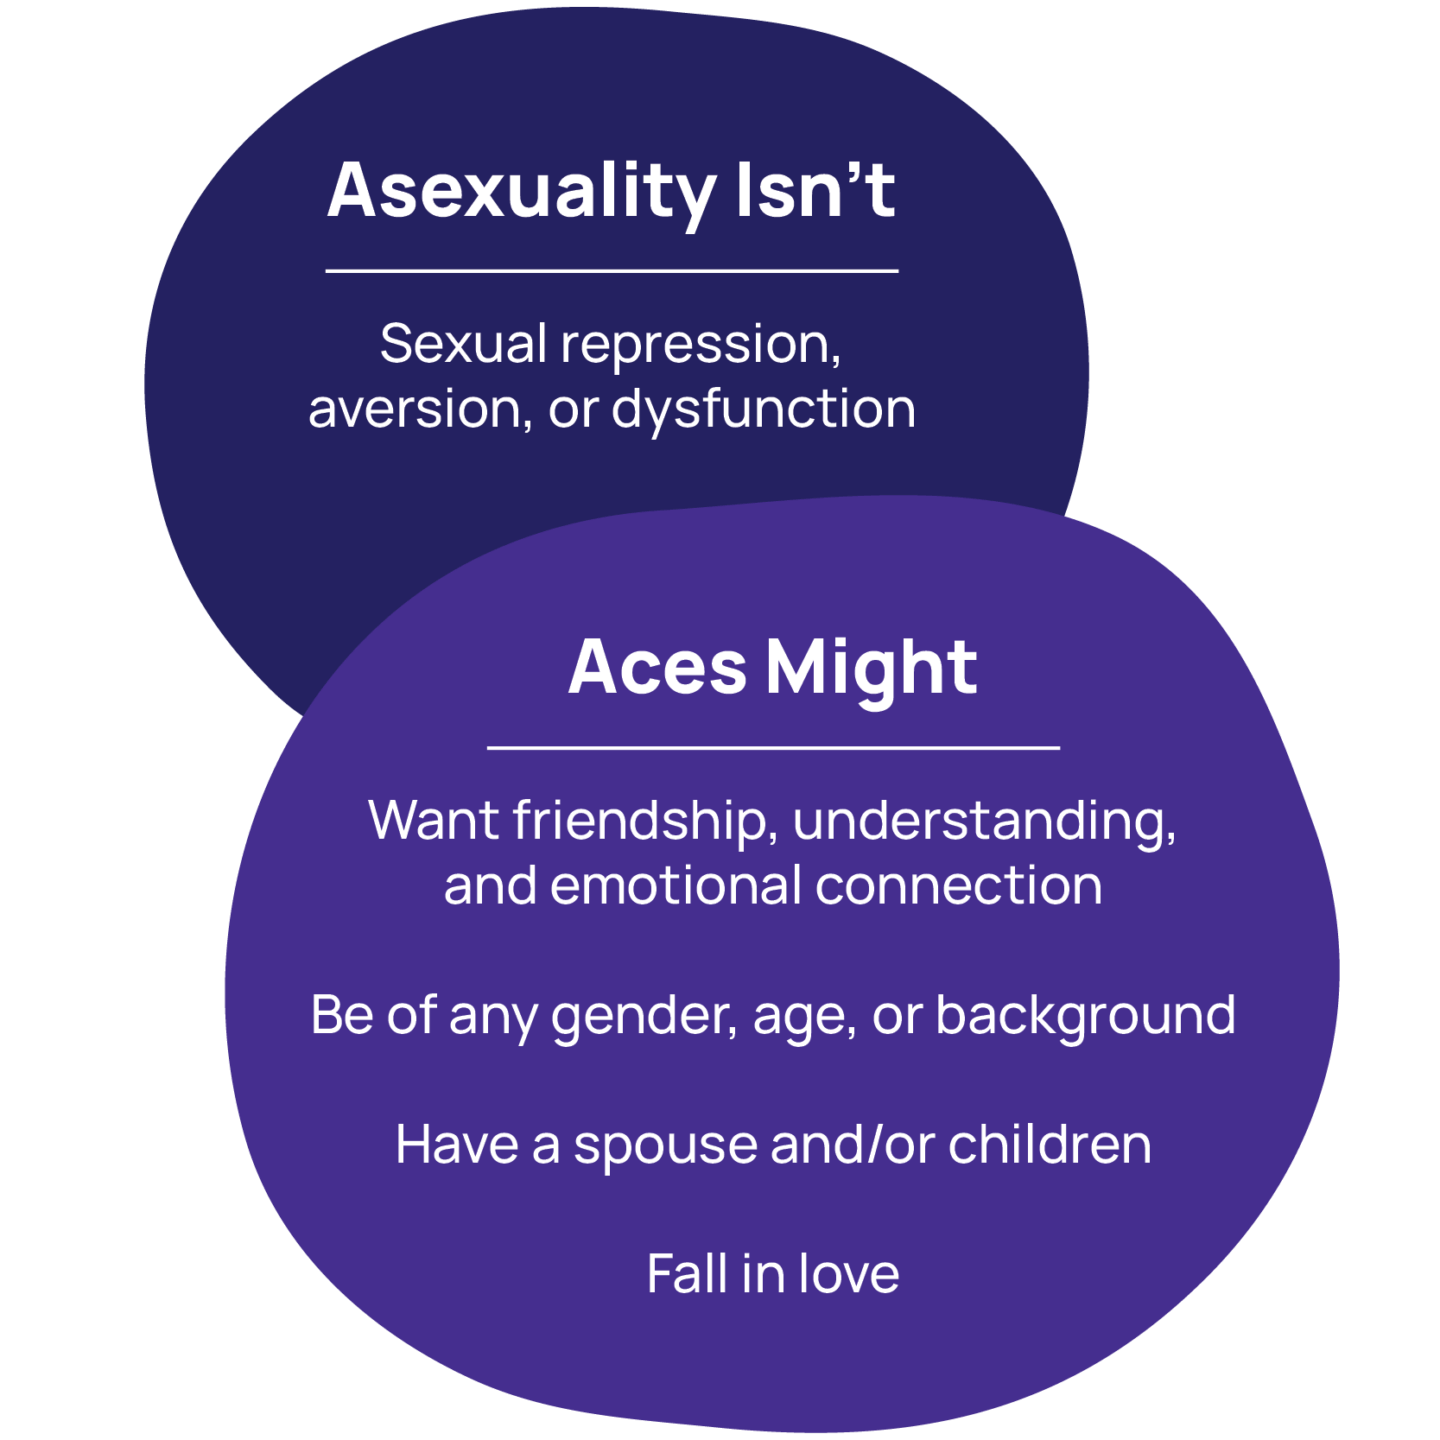 Asexuality Isn't - Sexual repression, aversion, or dysfunction. Aces might - Want friendship, understanding, and emotional connection; Be of any gender, age, or background. Have a spouse and/or children; Fall in love.